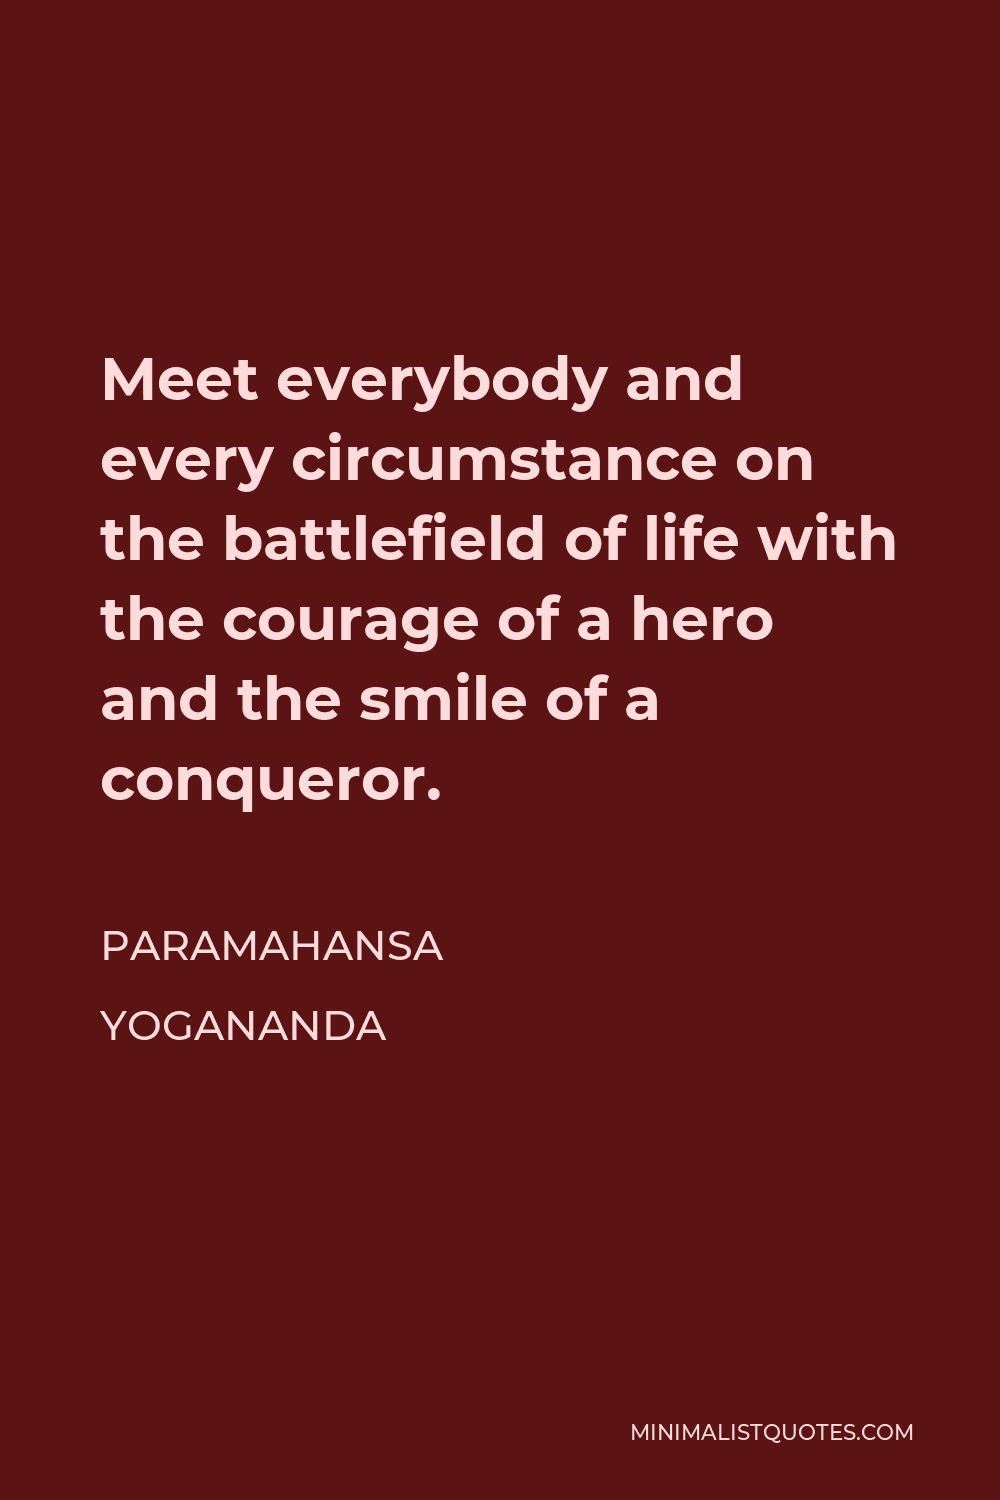 Paramahansa Yogananda Quote - Meet everybody and every circumstance on the battlefield of life with the courage of a hero and the smile of a conqueror.